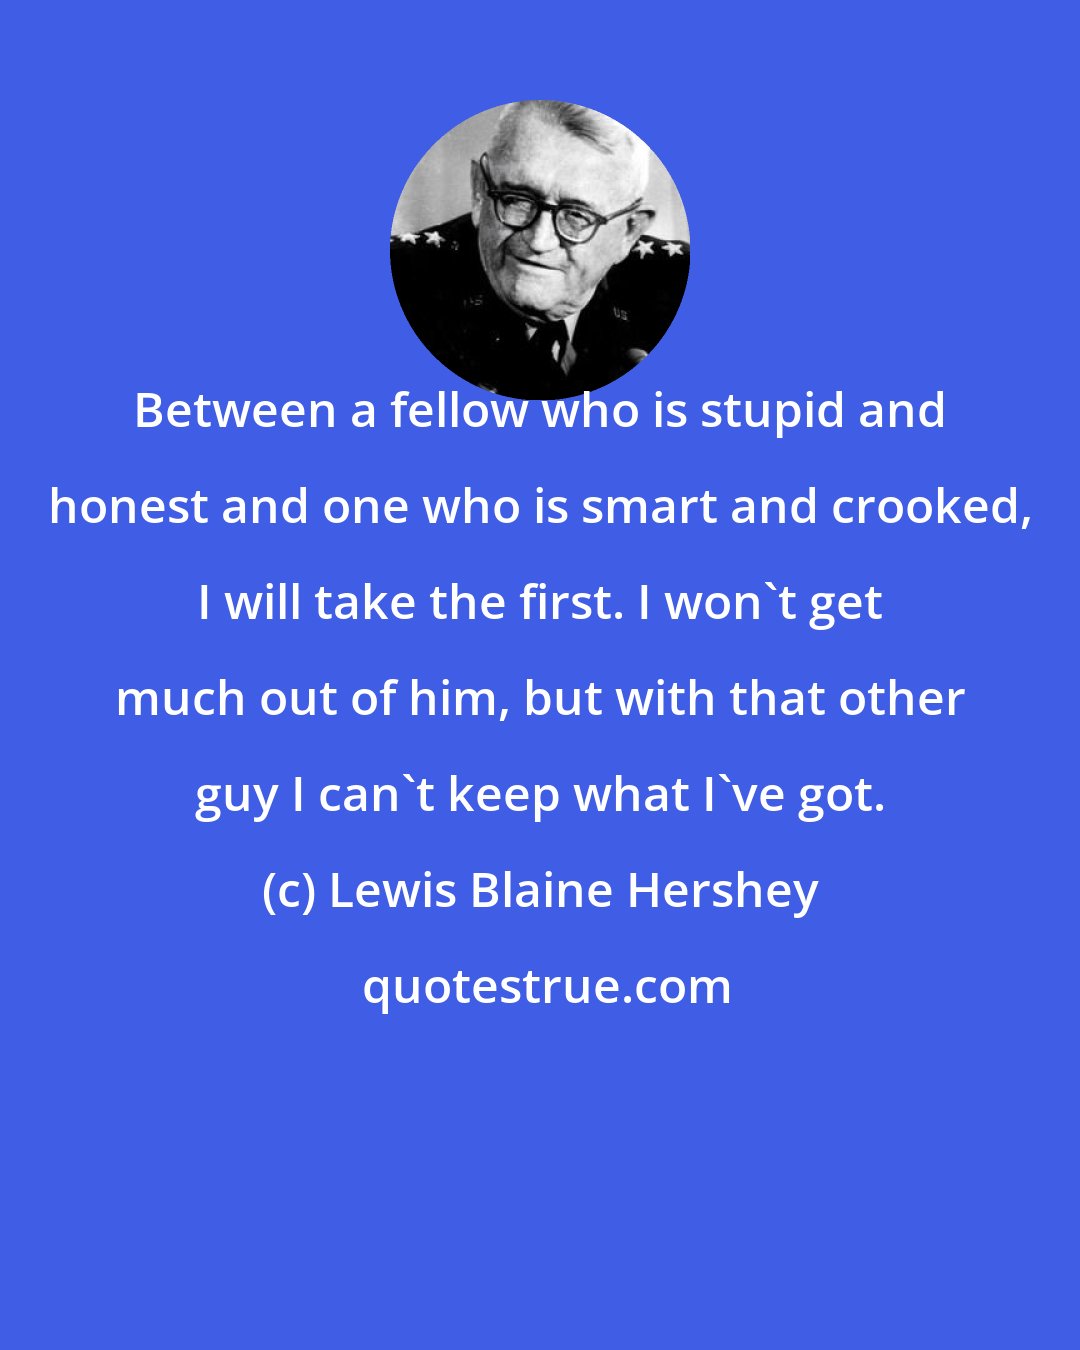 Lewis Blaine Hershey: Between a fellow who is stupid and honest and one who is smart and crooked, I will take the first. I won't get much out of him, but with that other guy I can't keep what I've got.